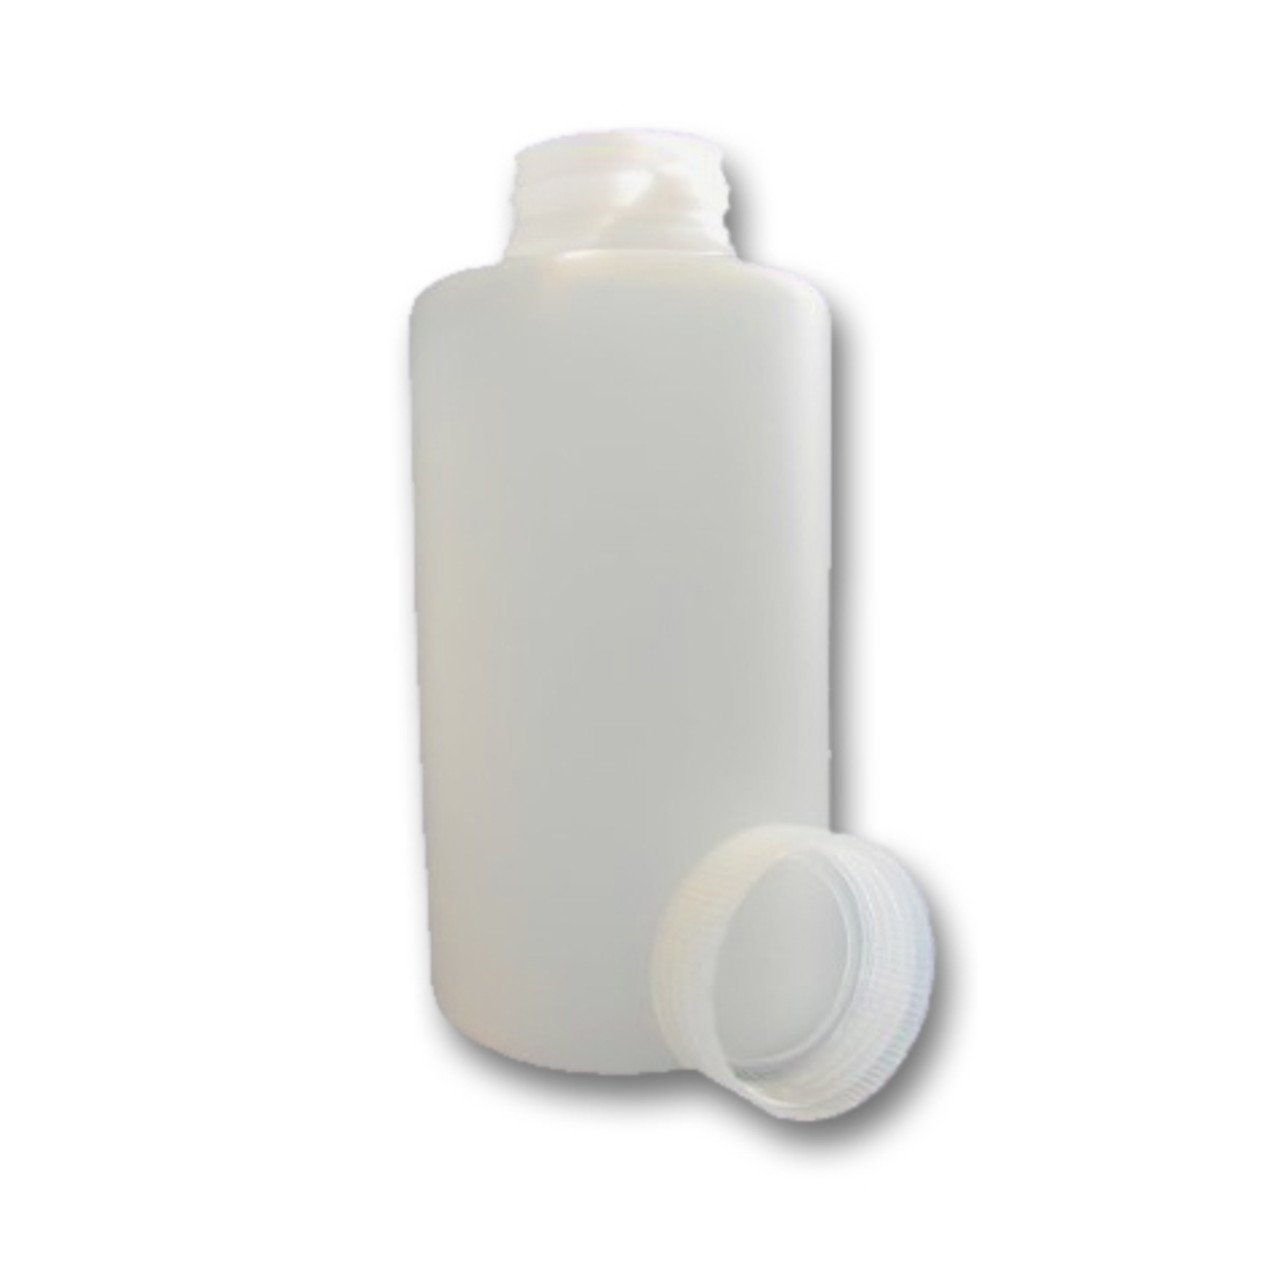 Certified Clean 2 Liter Wide Mouth Sample Bottles with Screw Caps, HDPE, case/8